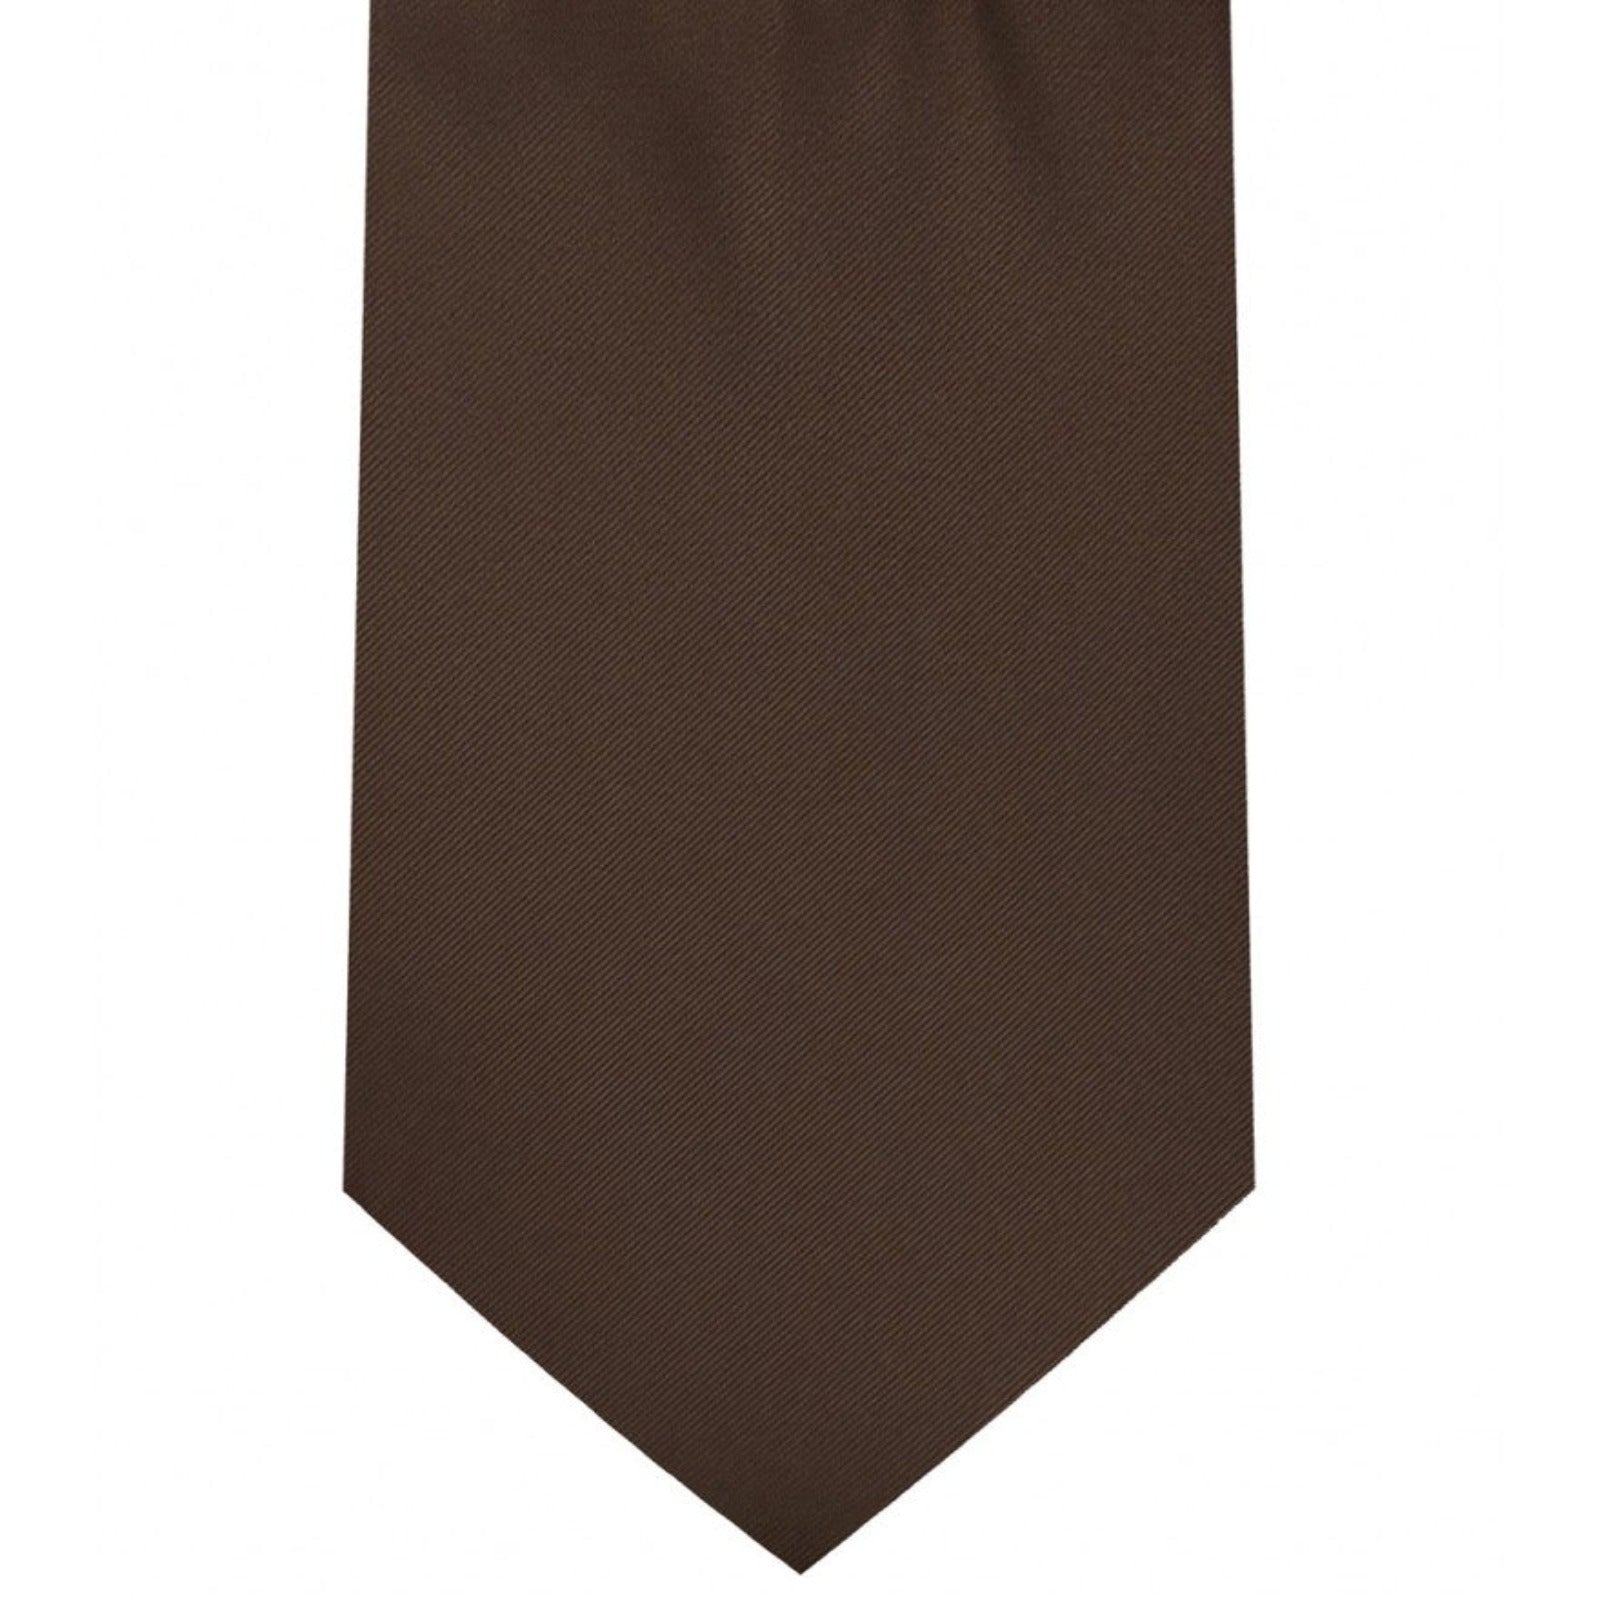 Classic Chocolate Brown Tie Regular width 3.5 inches With Matching Pocket Square | KCT Menswear 